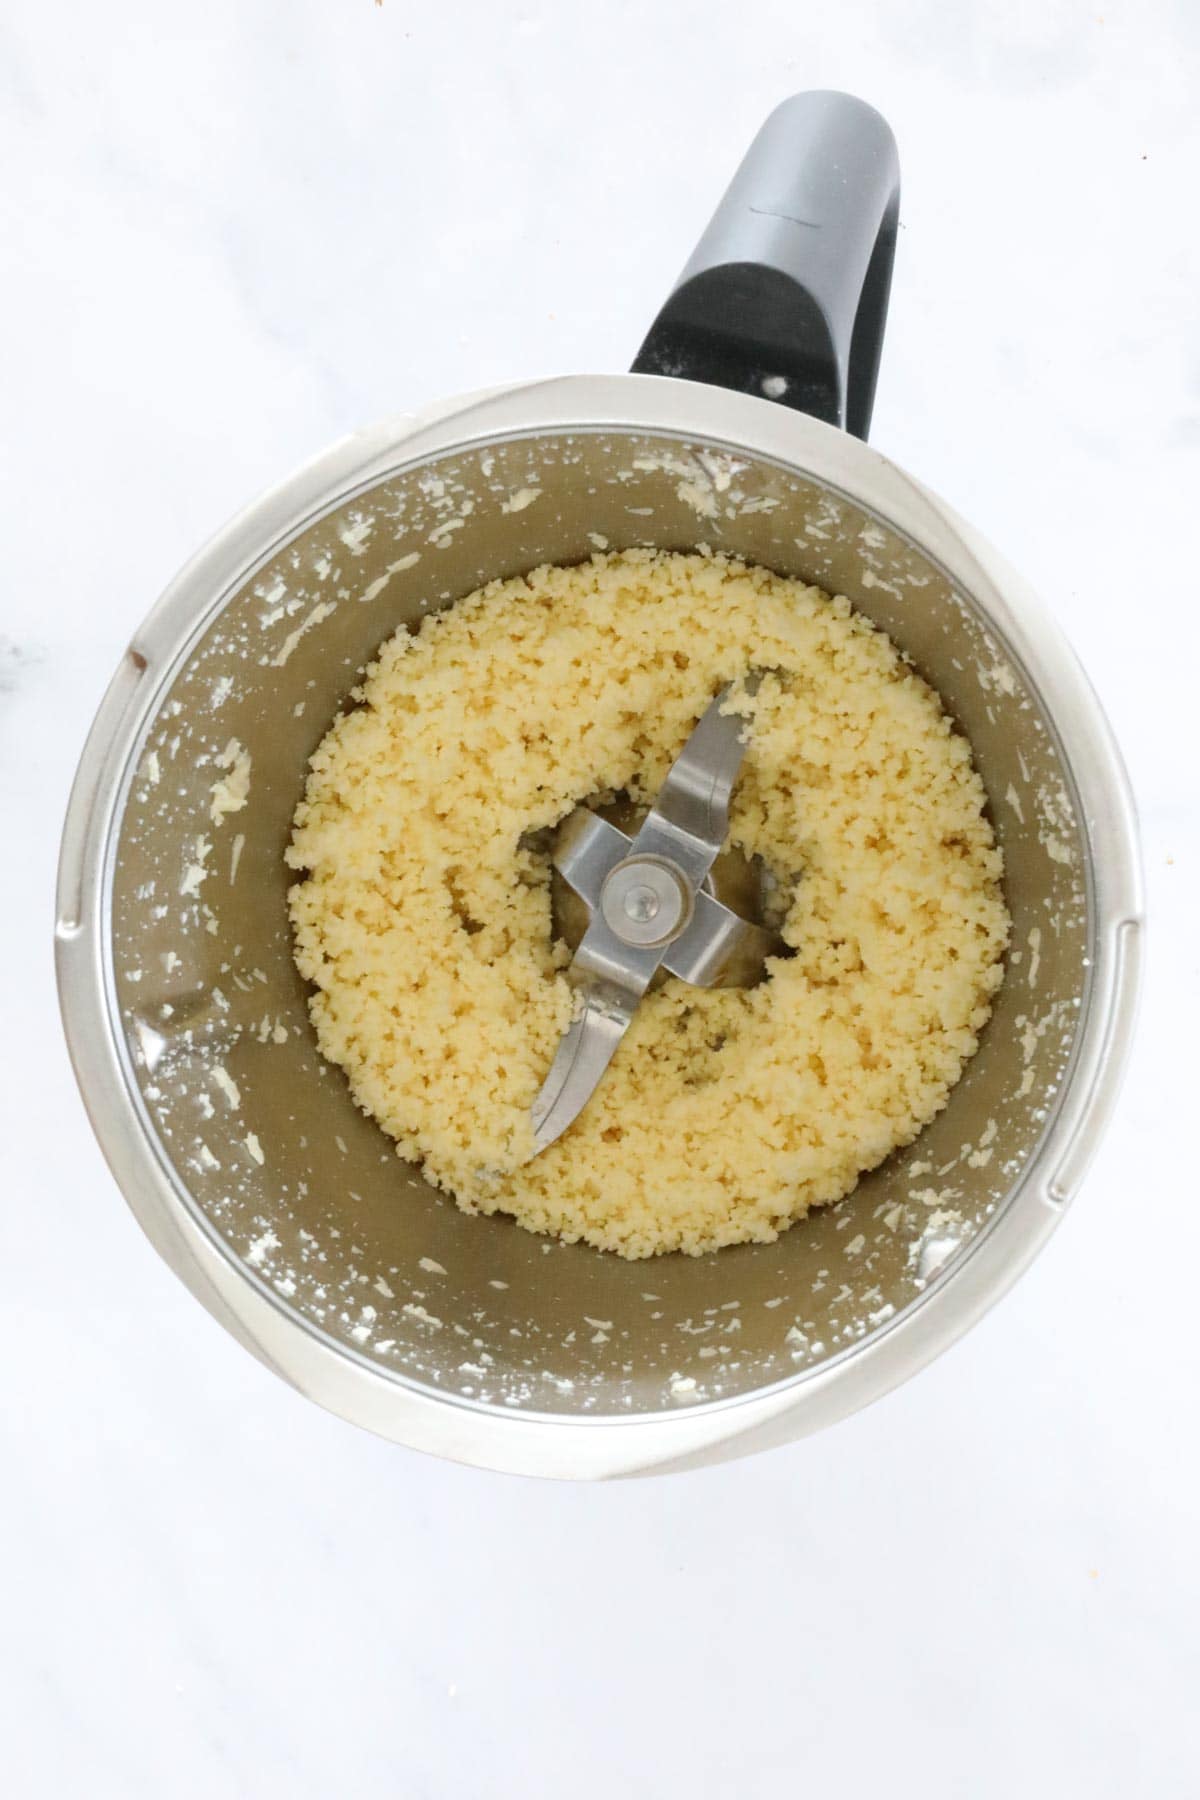 Grated cheese in a Thermomix.